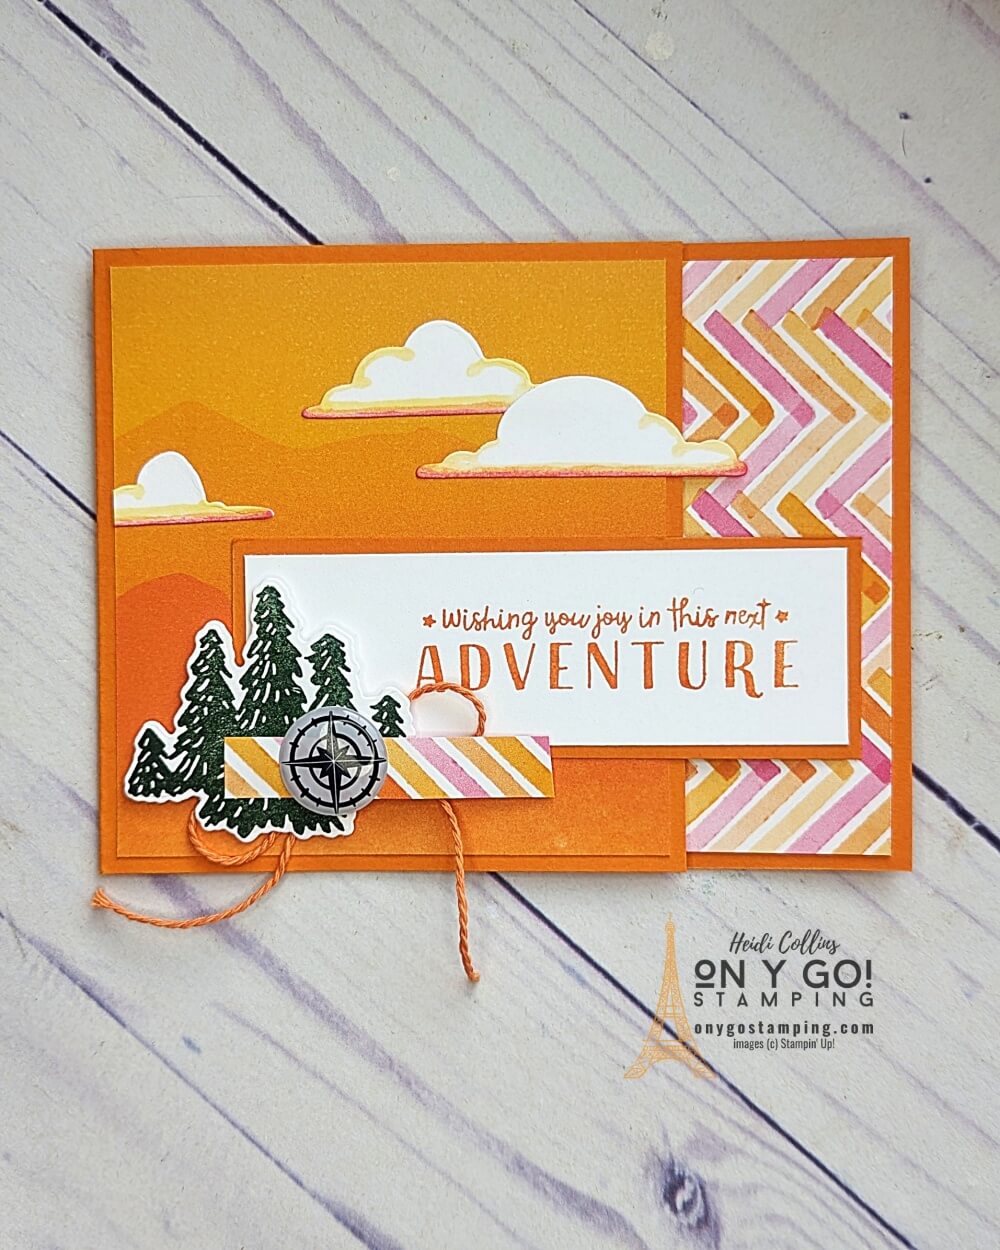 Calling all card-makers! Are you looking for a fun fold card design that is quick and easy to make and that celebrates life's journeys? Look no further than Stampin' Up's Greatest Journey stamp set and Enjoy the Journey Designer Series Paper! You won't believe how quickly you can create a stunning card that will be sure to bring a smile!